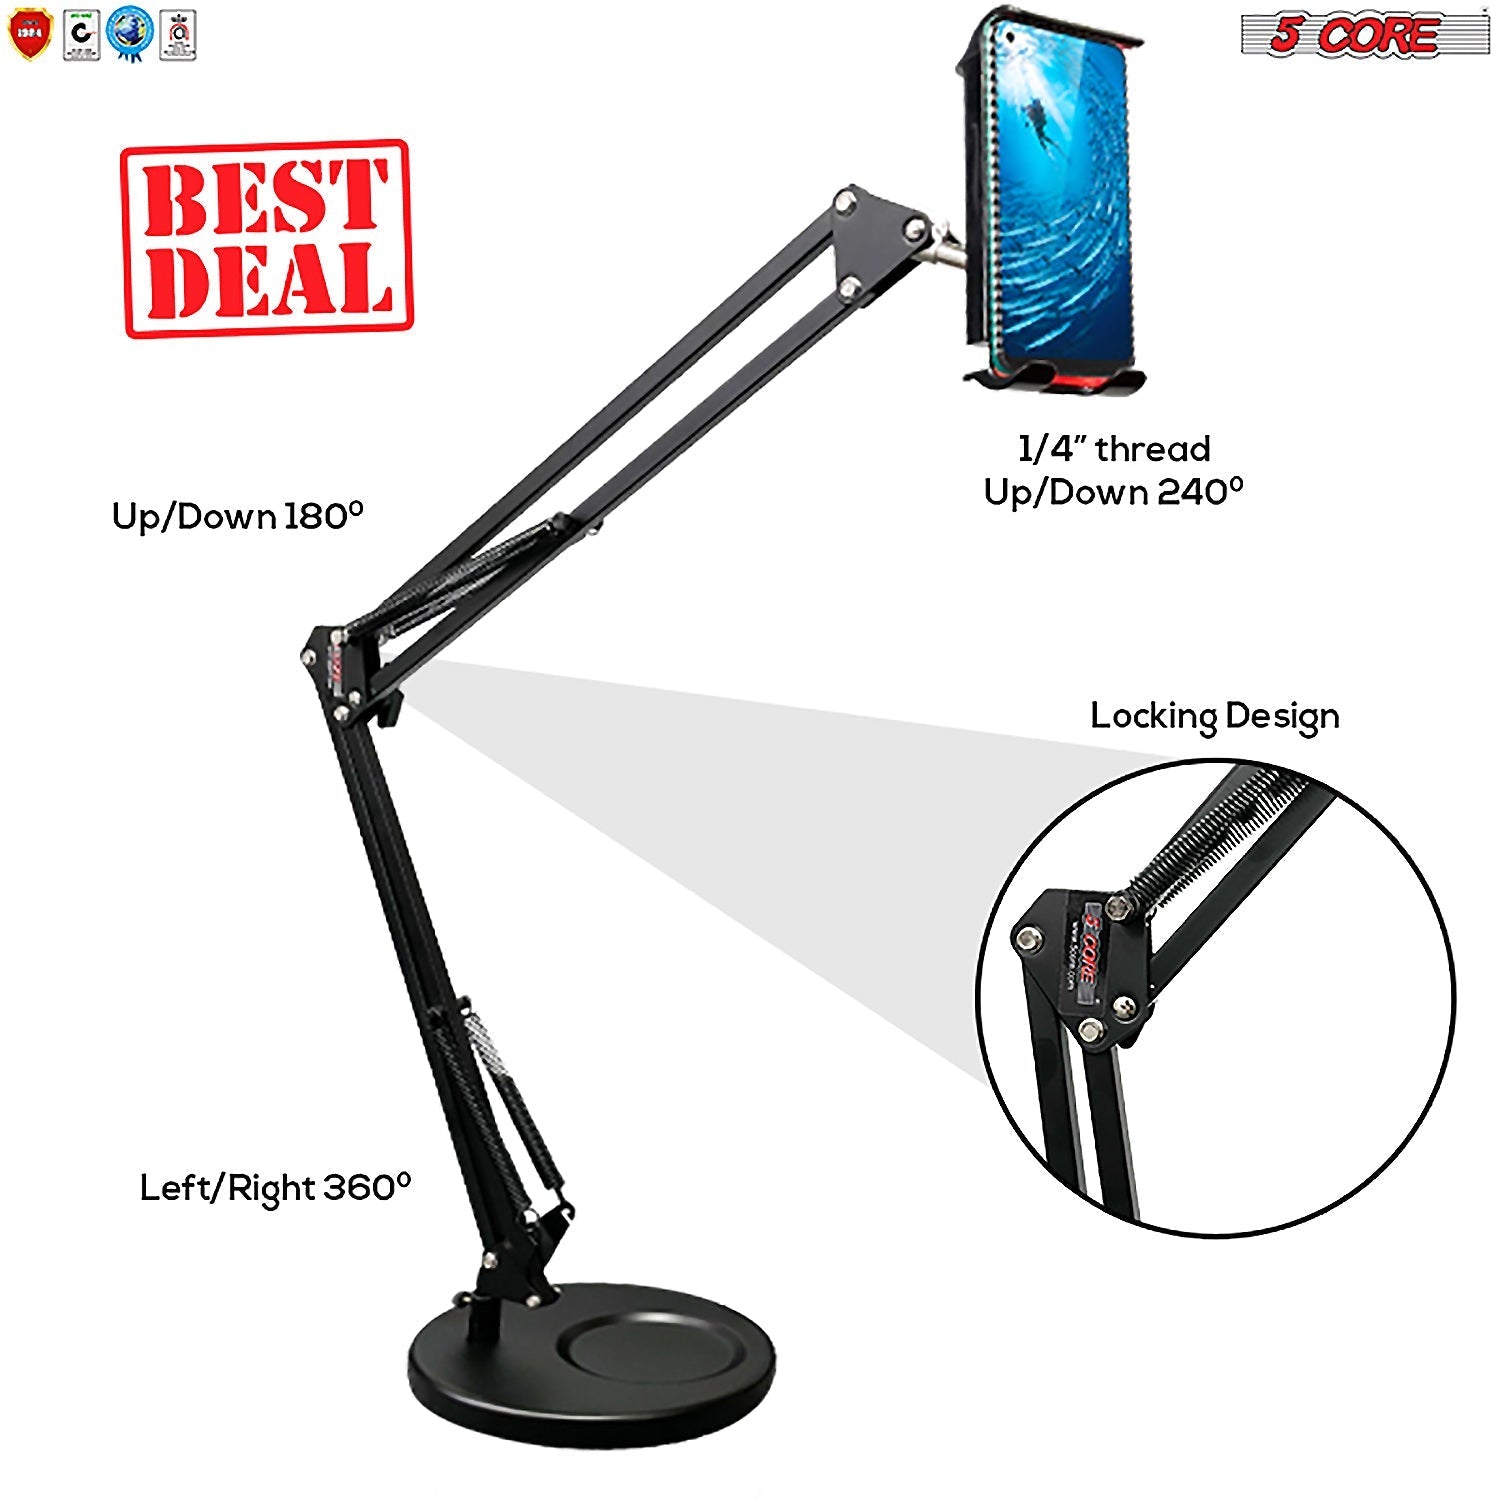 5Core Foldable Arm Mount Holder Blogger Bracket Stand for Mobile Phones Tablets ARM MOB - KME means the very best